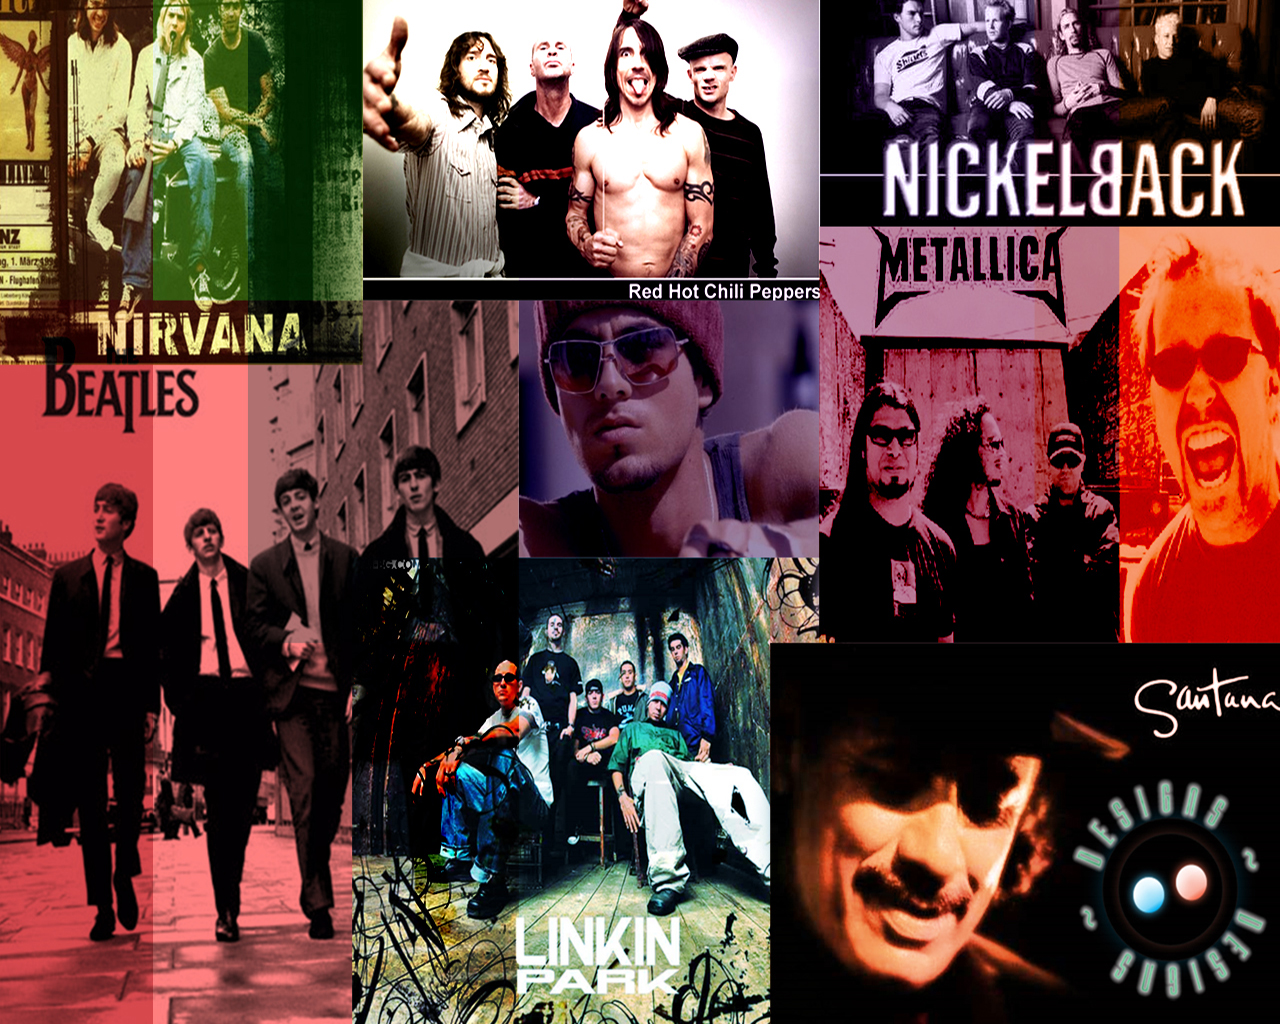 Music collage